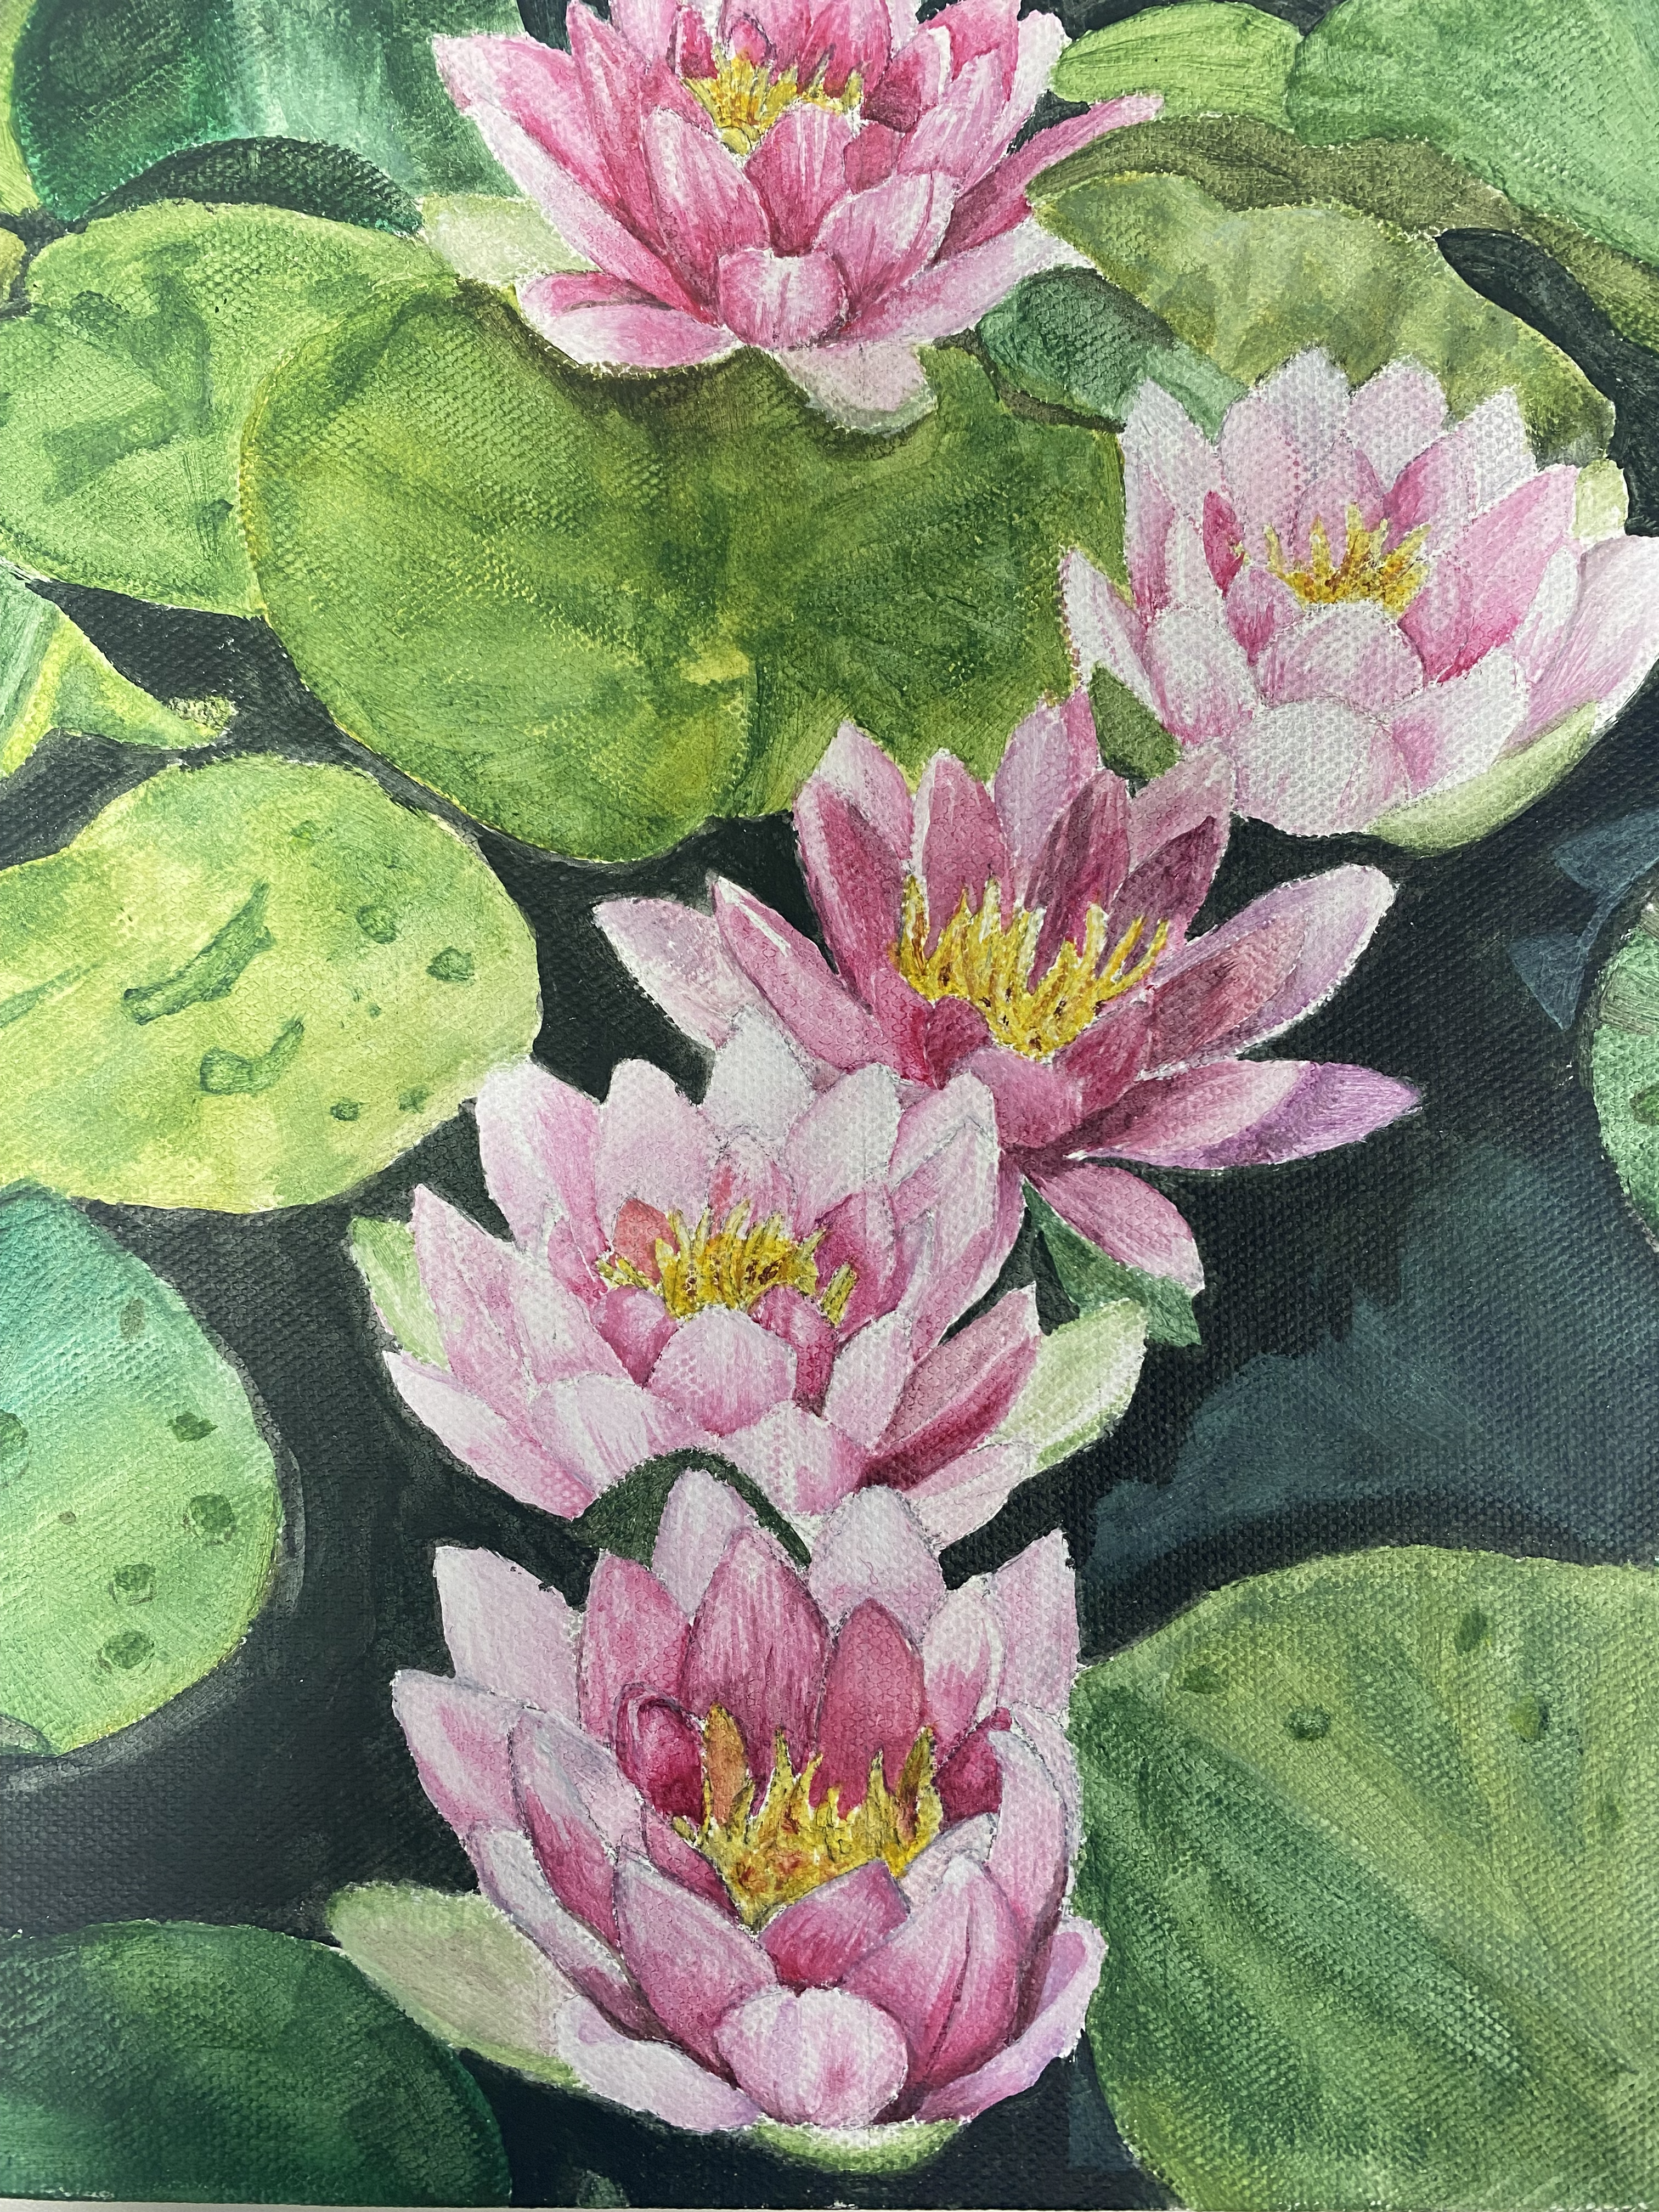 Watercolor painting of pink lotus flowers with green lily pads on water.